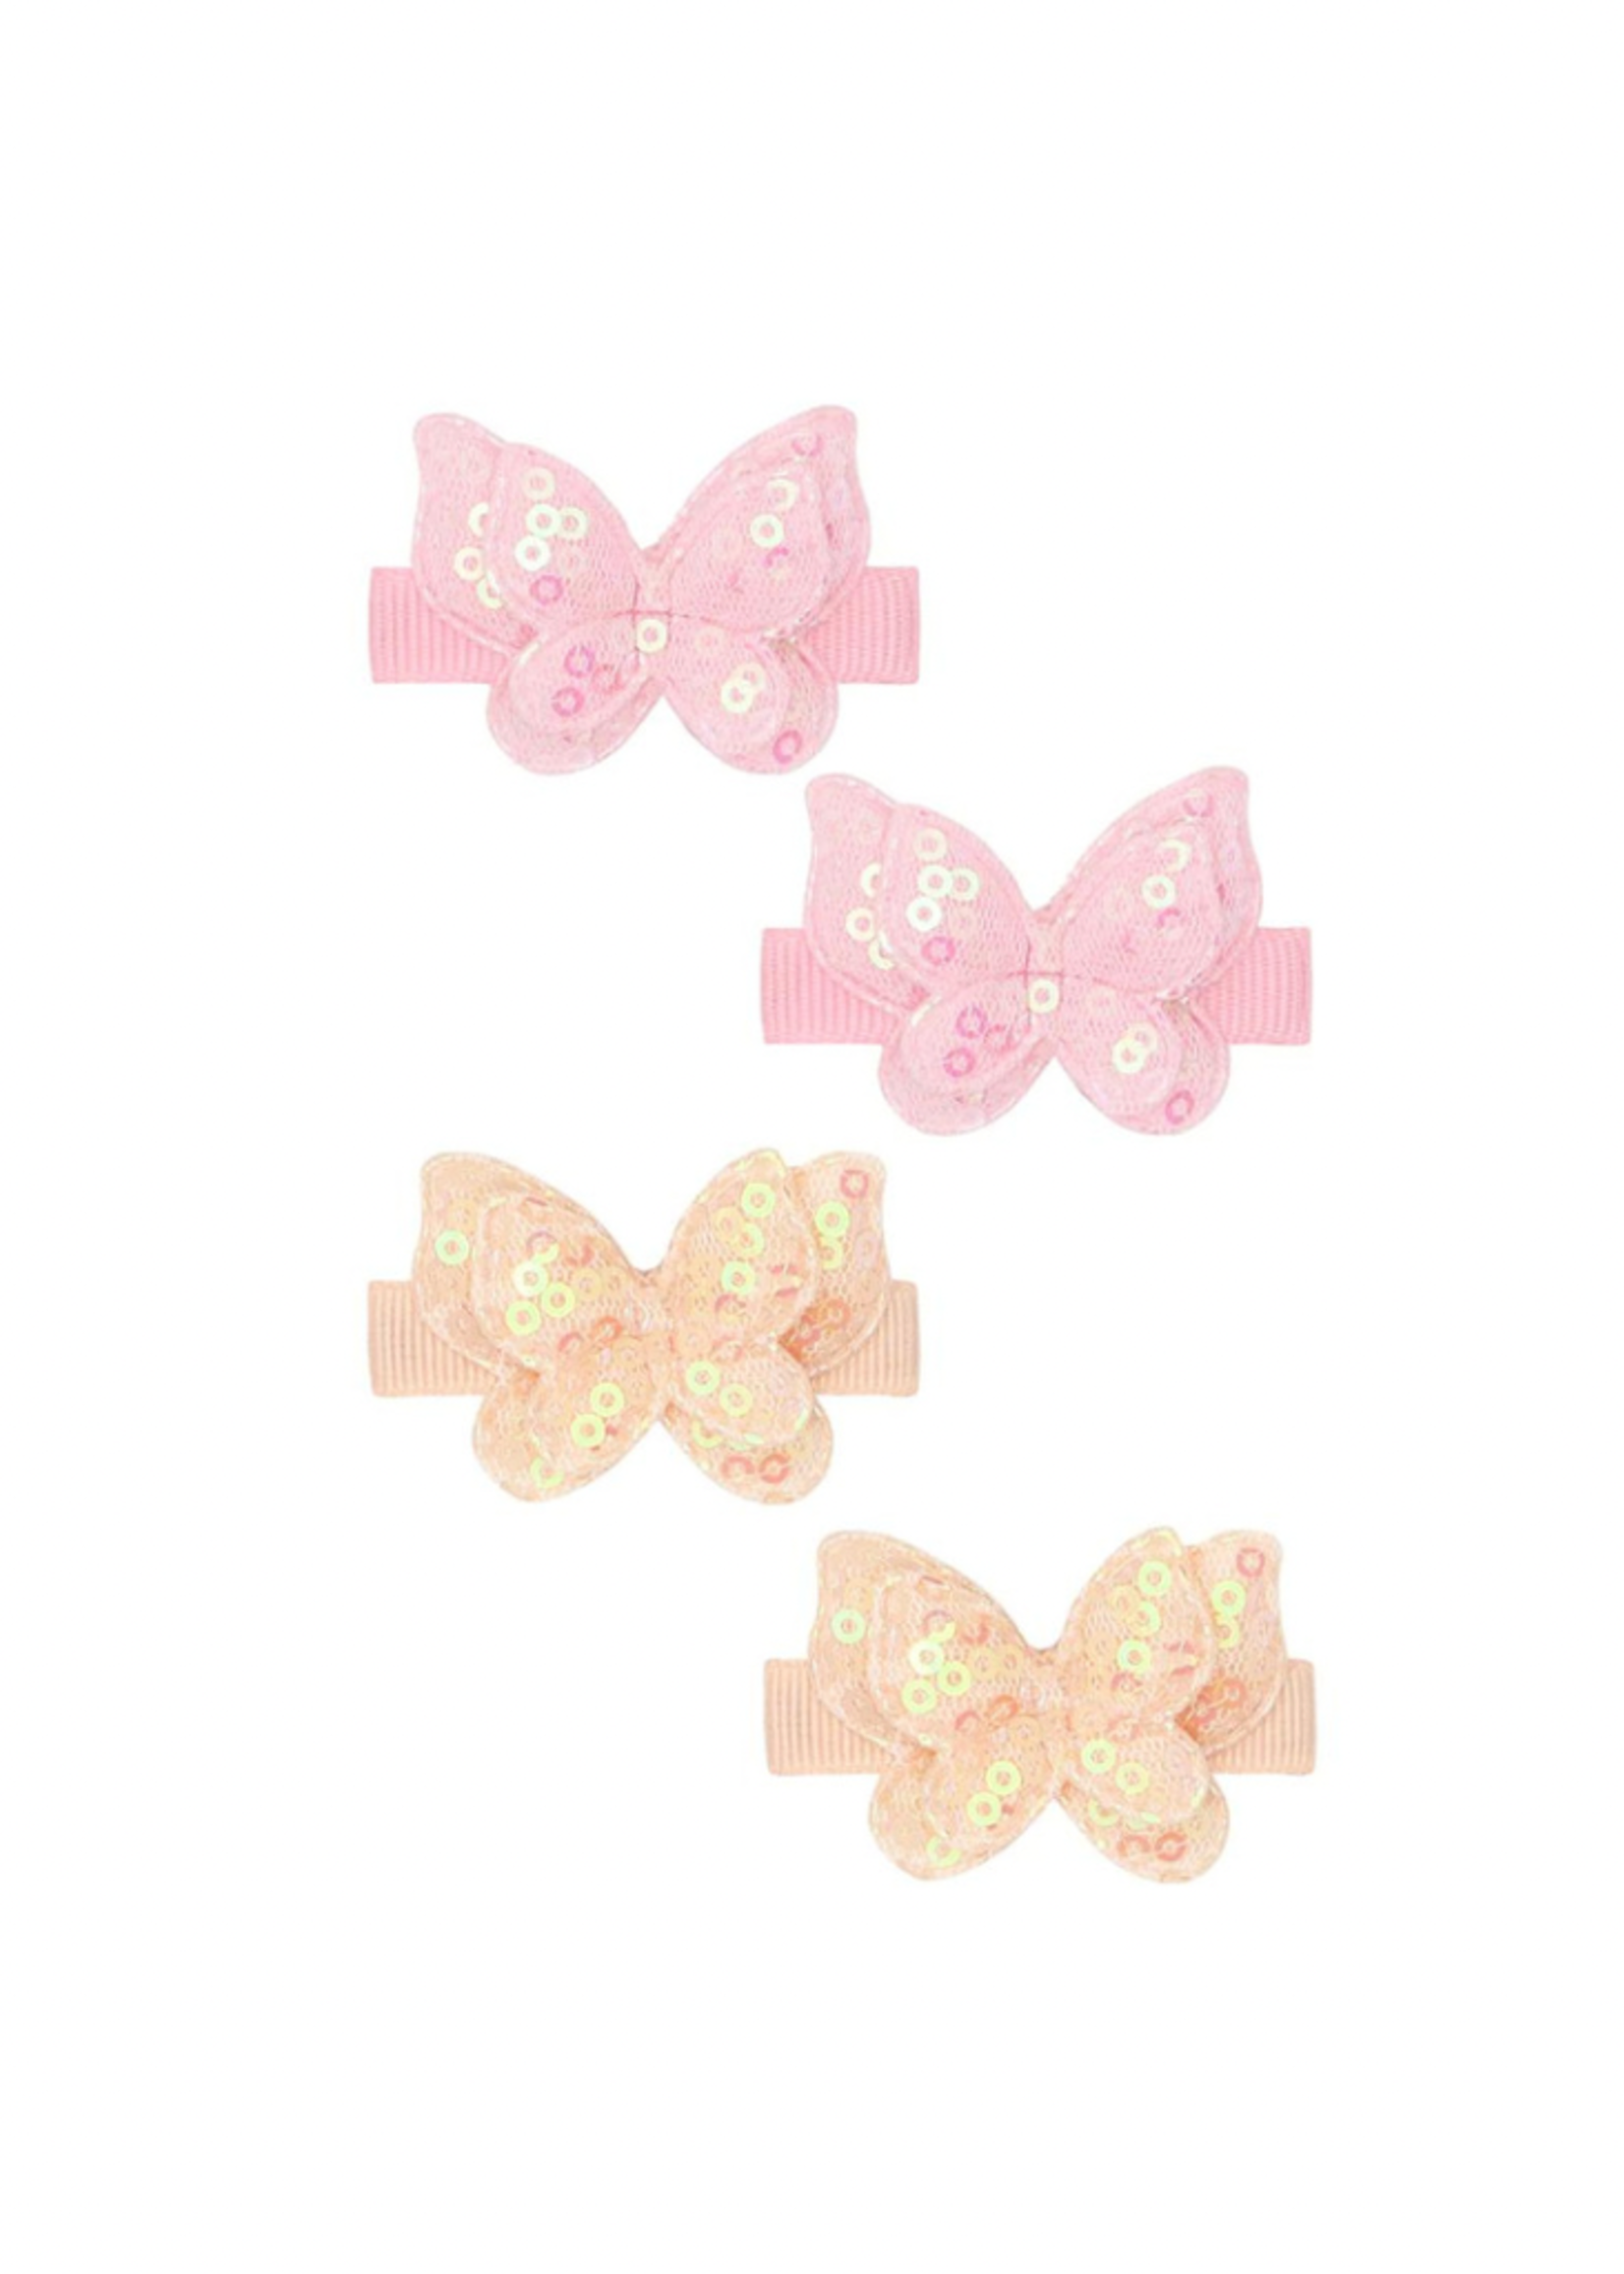 Baby Bling Sequin Butterfly Clips - Pink/Peach